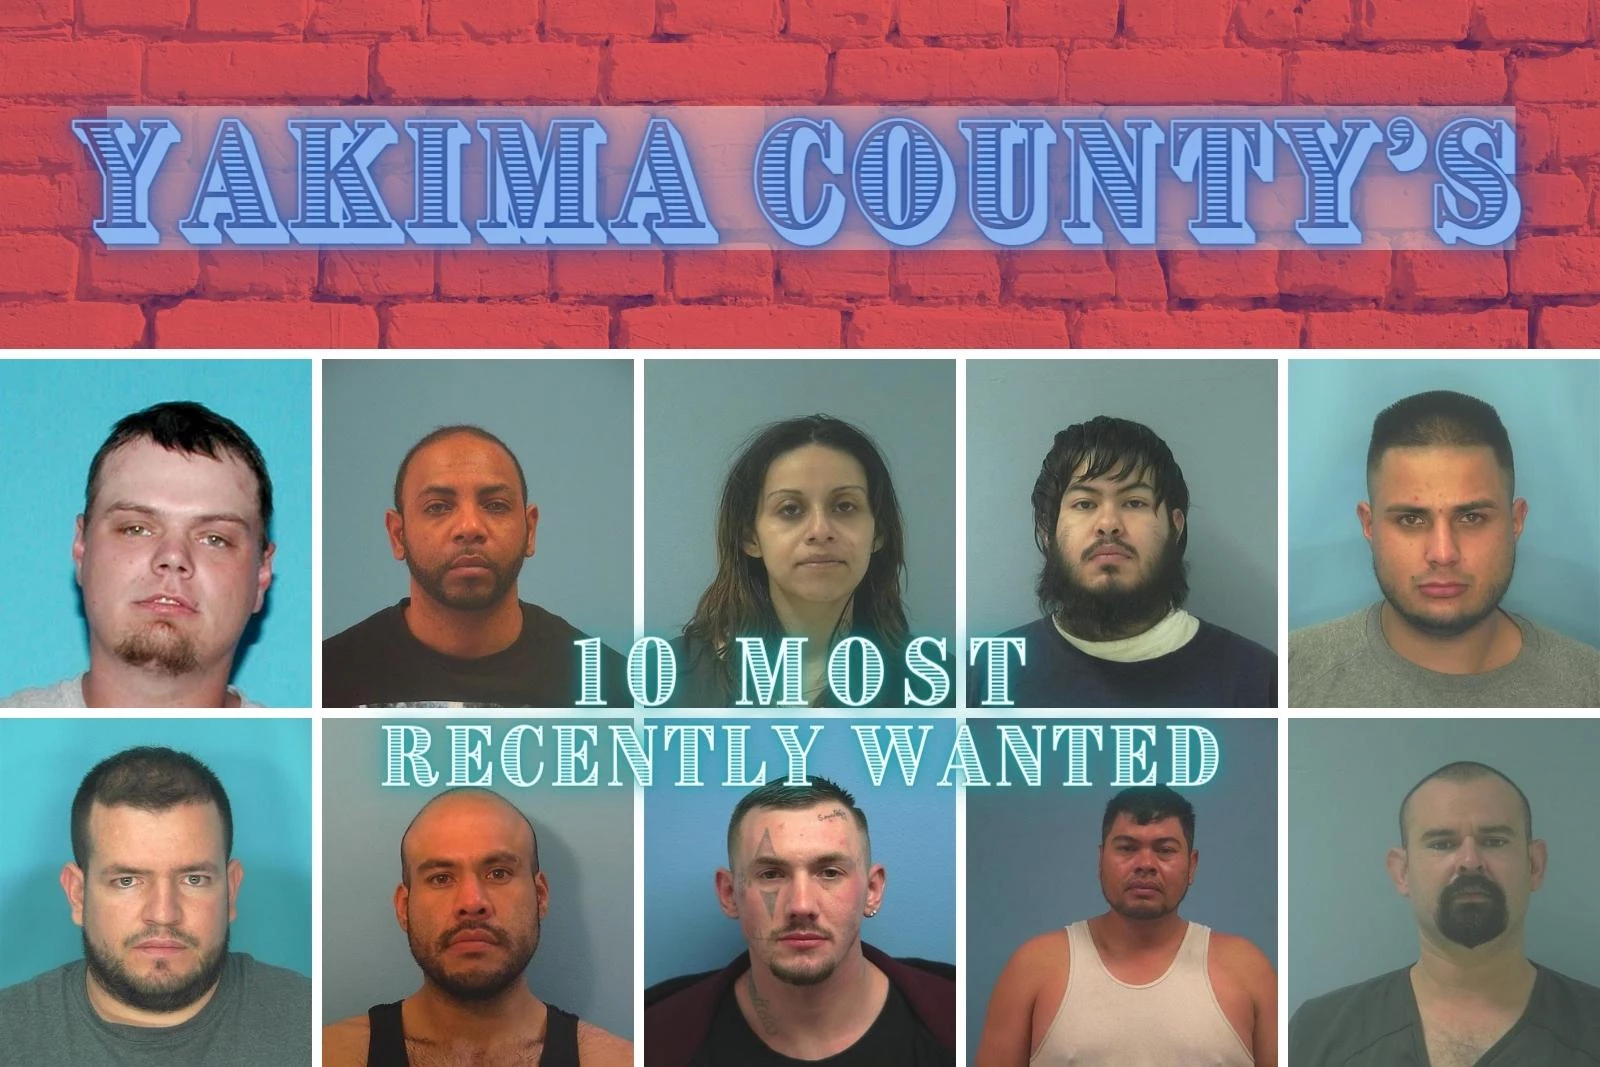 Have You Seen These Recently Wanted Fugitives of Yakima County?